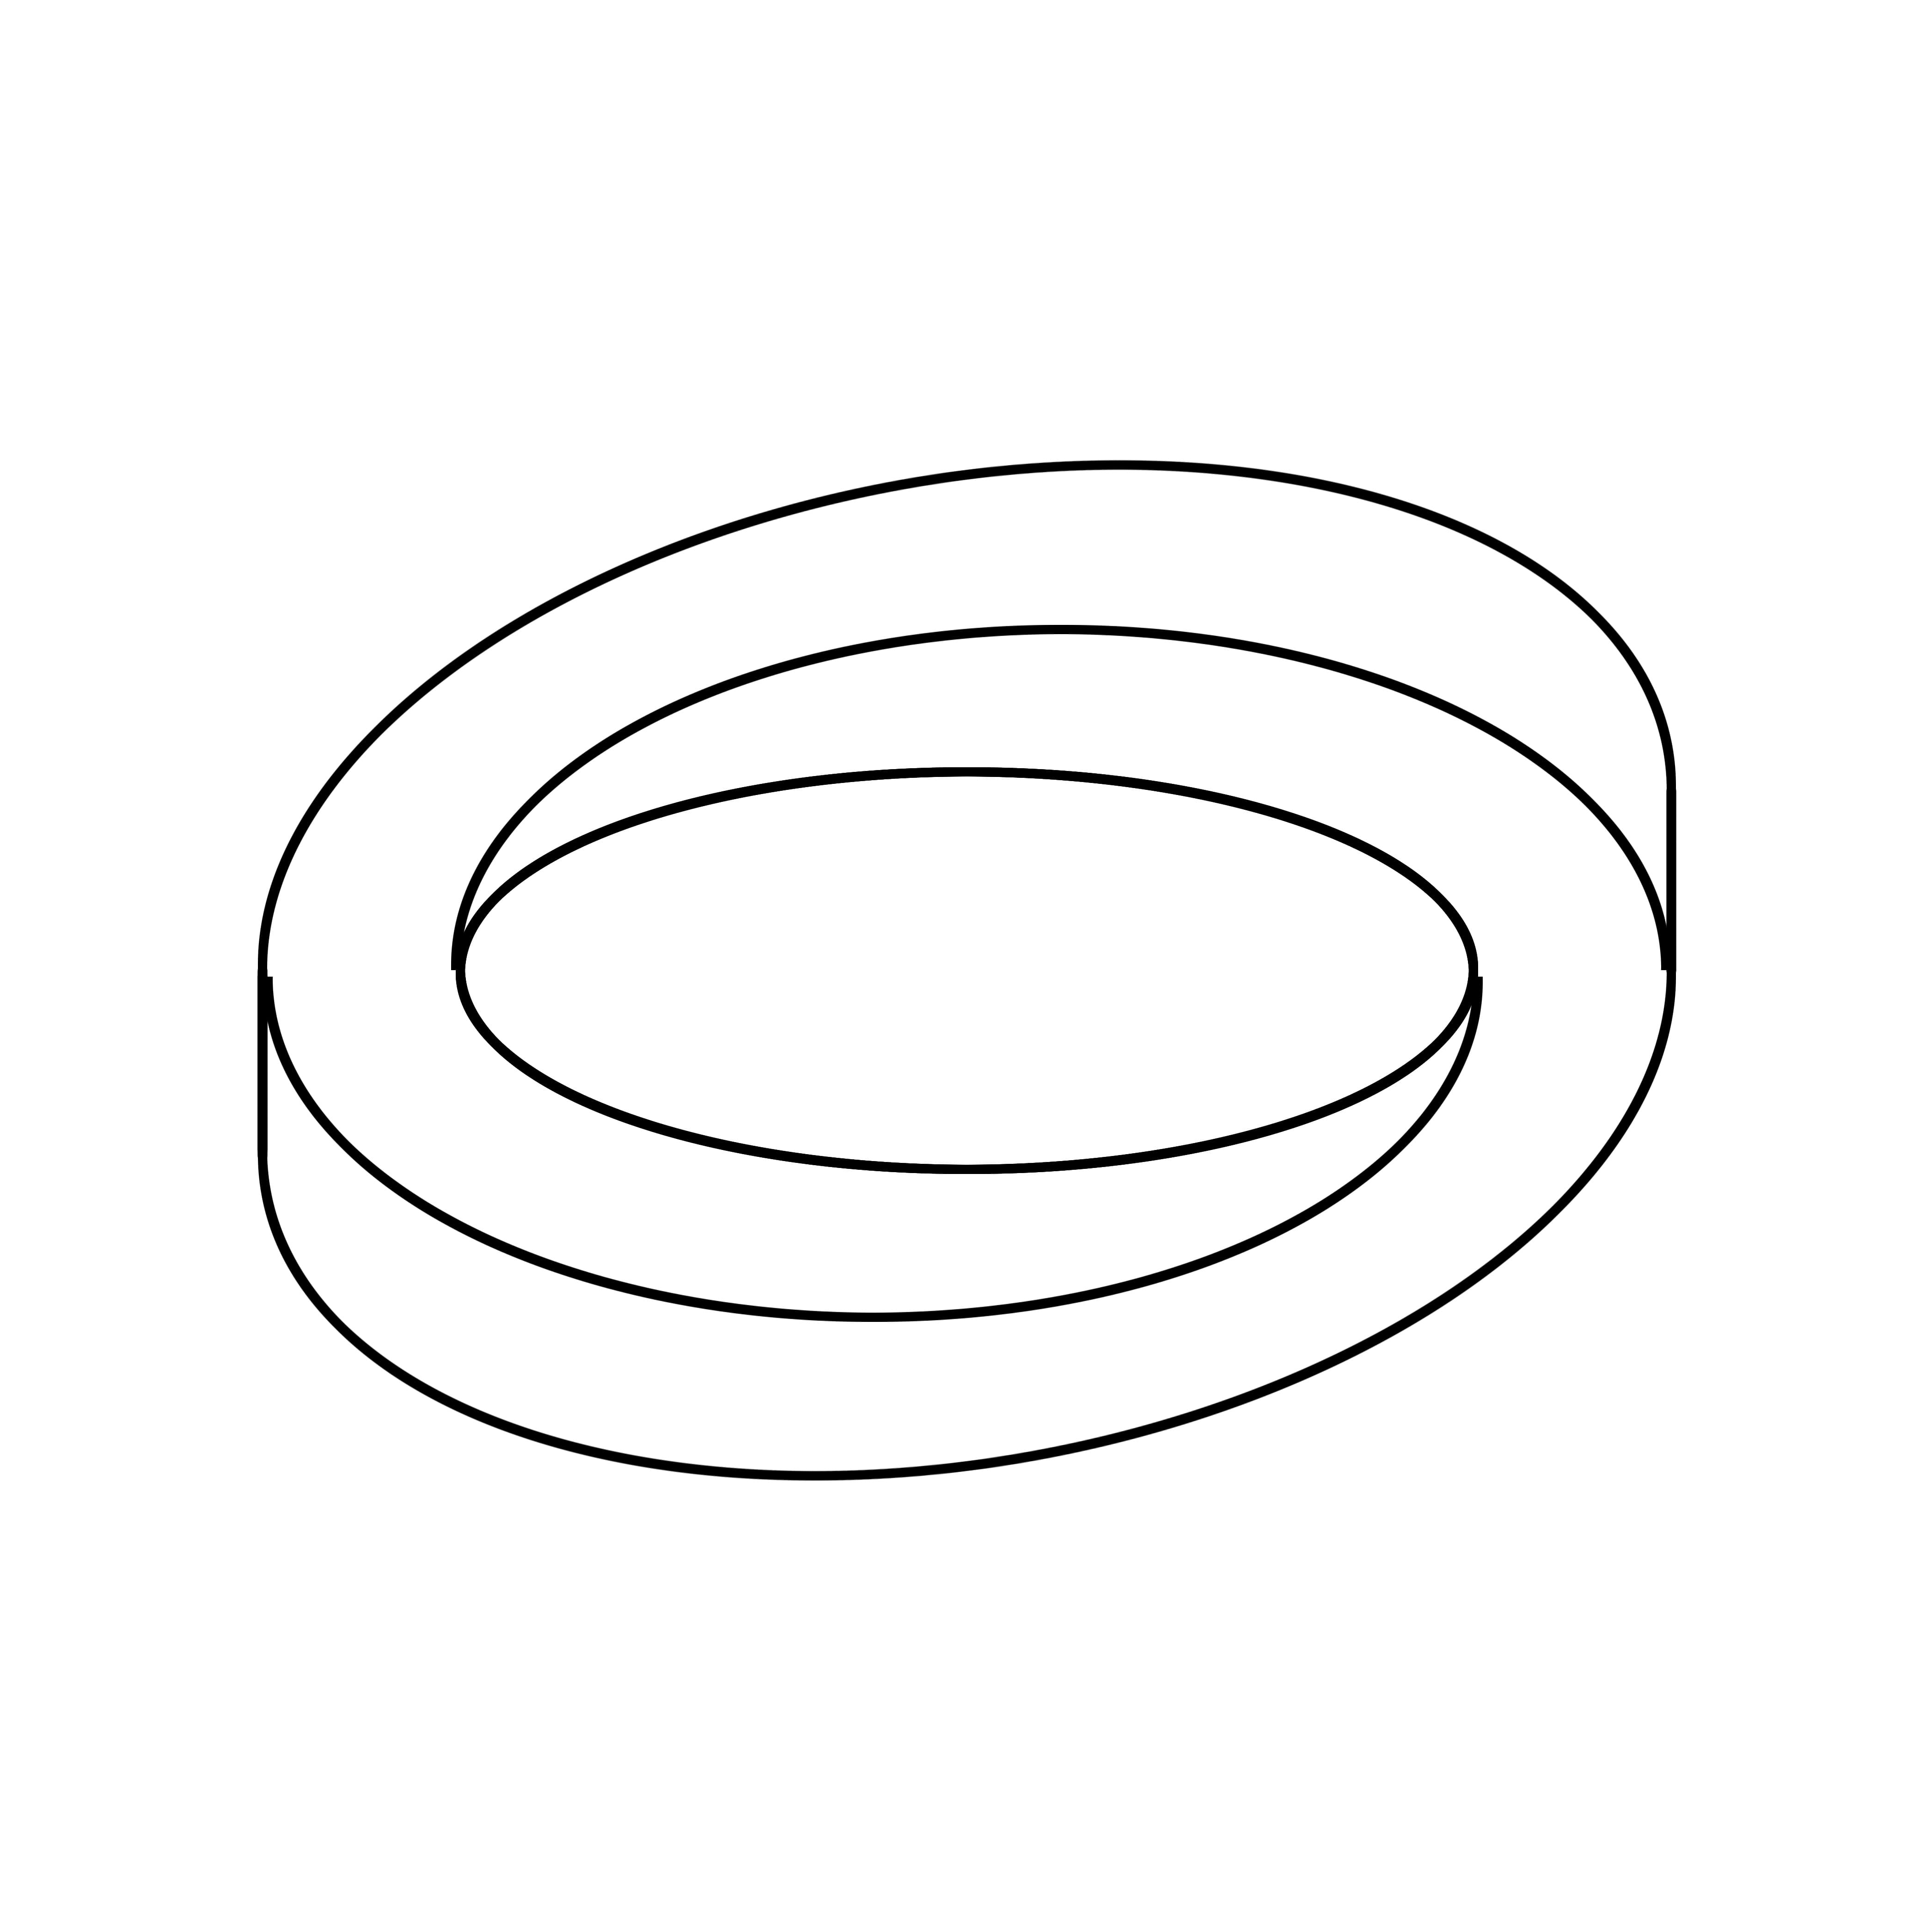 draw optical illusion Impossible Oval